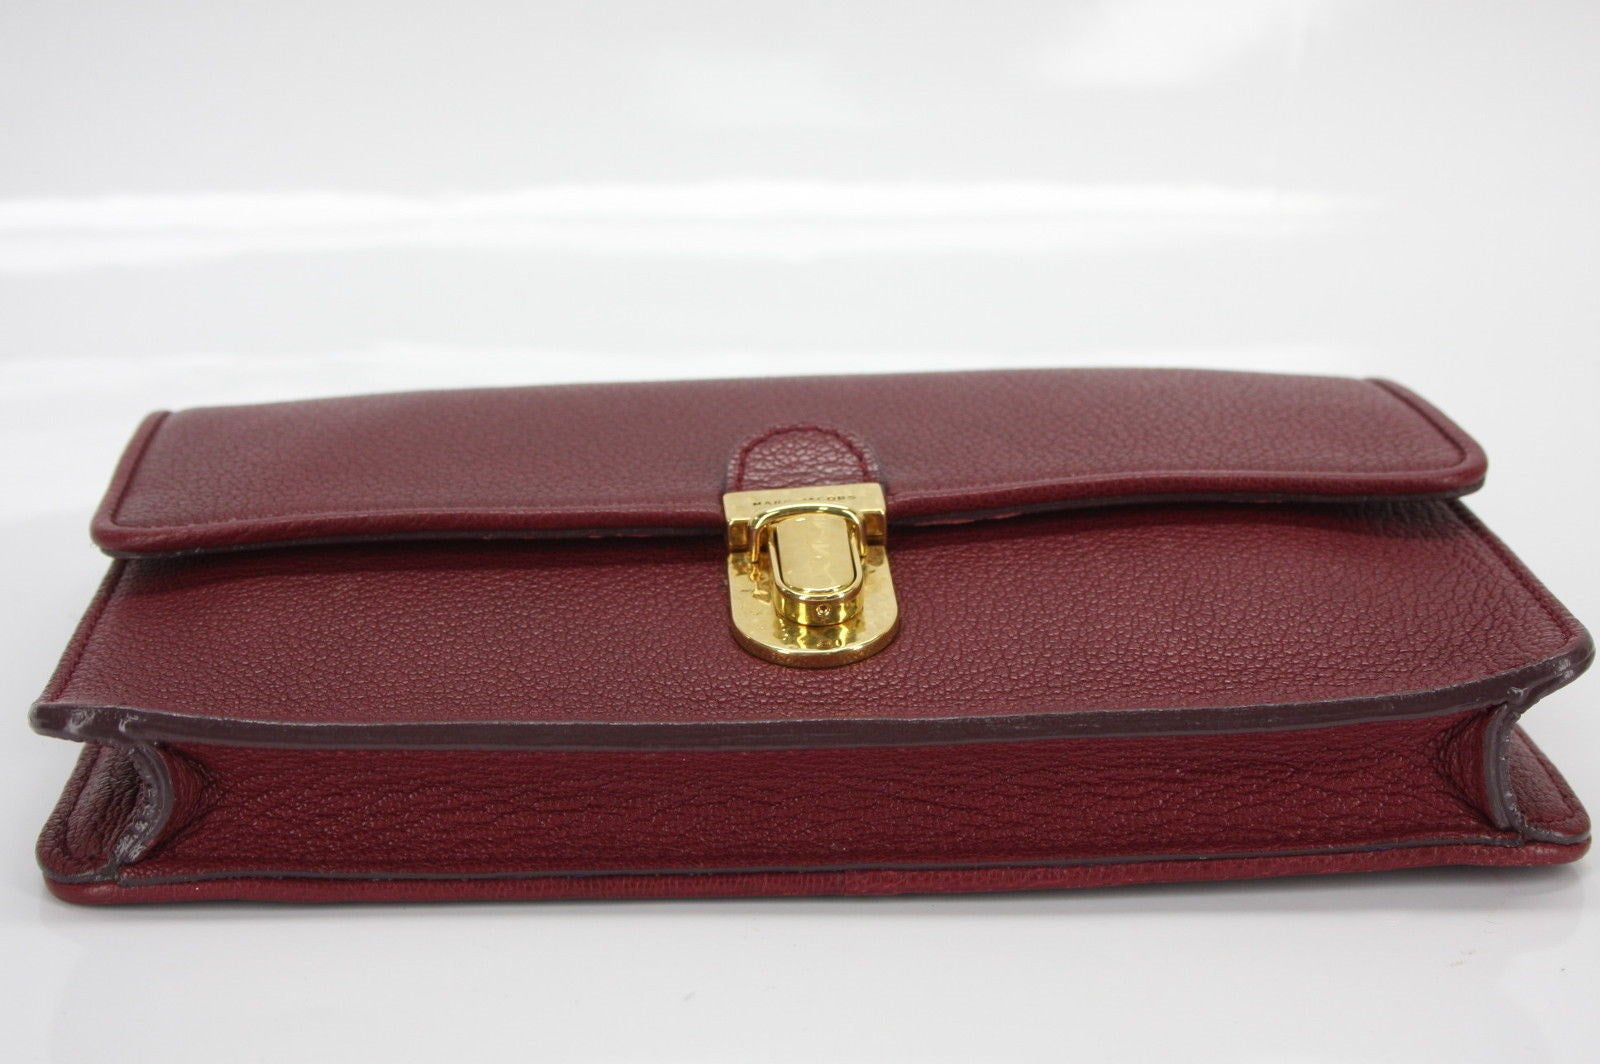 Marc Jacobs Leather Venetia Push Lock Front Clutch Bag $495 New Small Purse